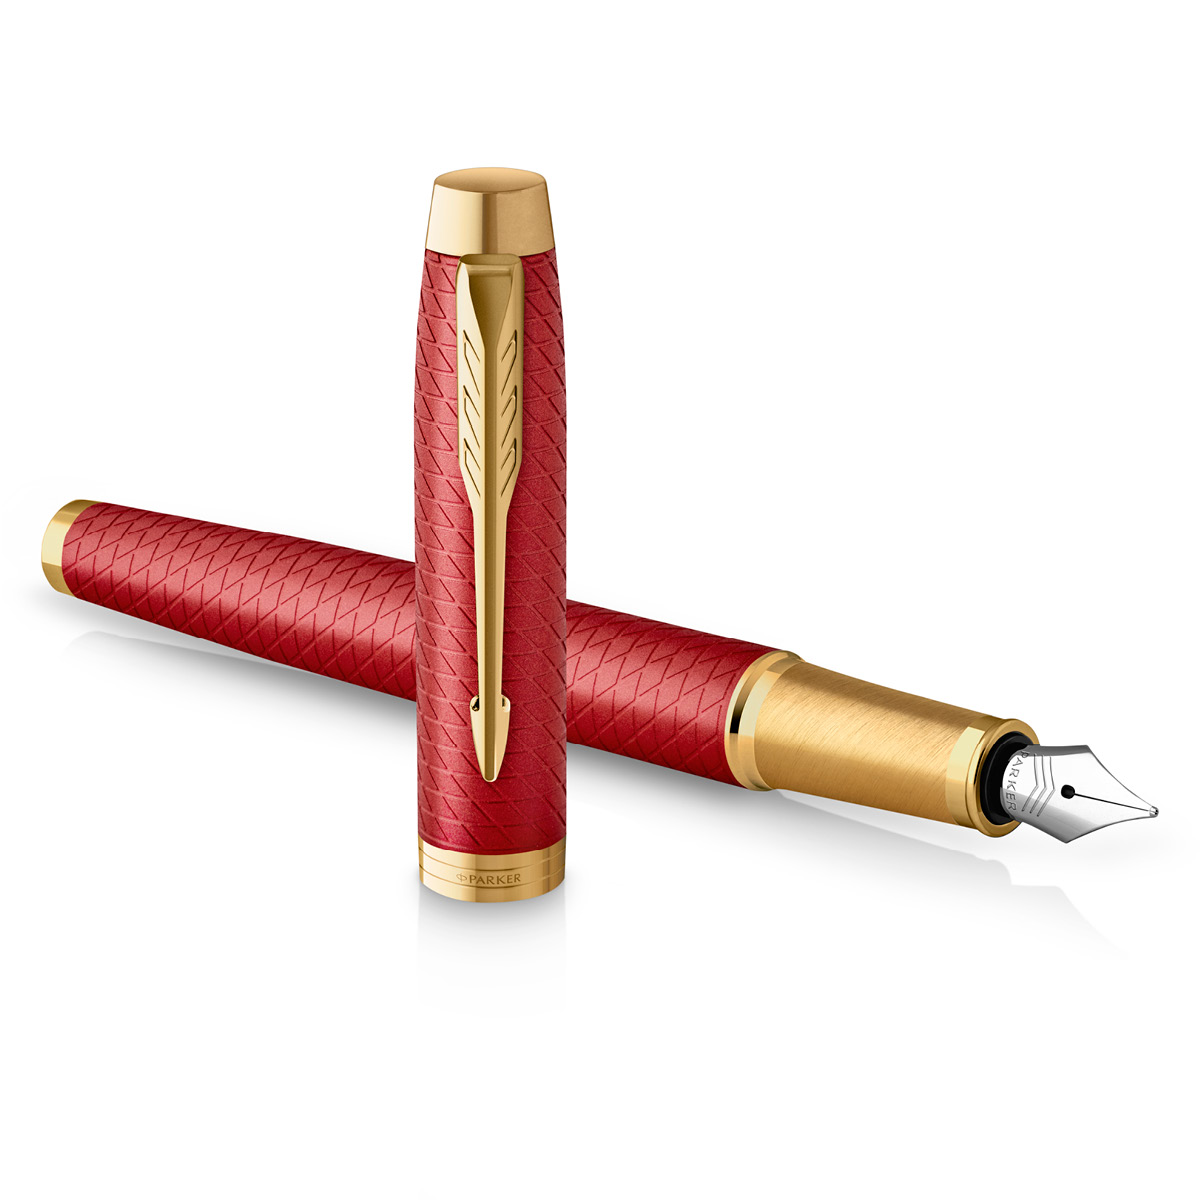 IM Premium Red/Gold Fountain pen in the group Pens / Fine Writing / Fountain Pens at Pen Store (112692_r)